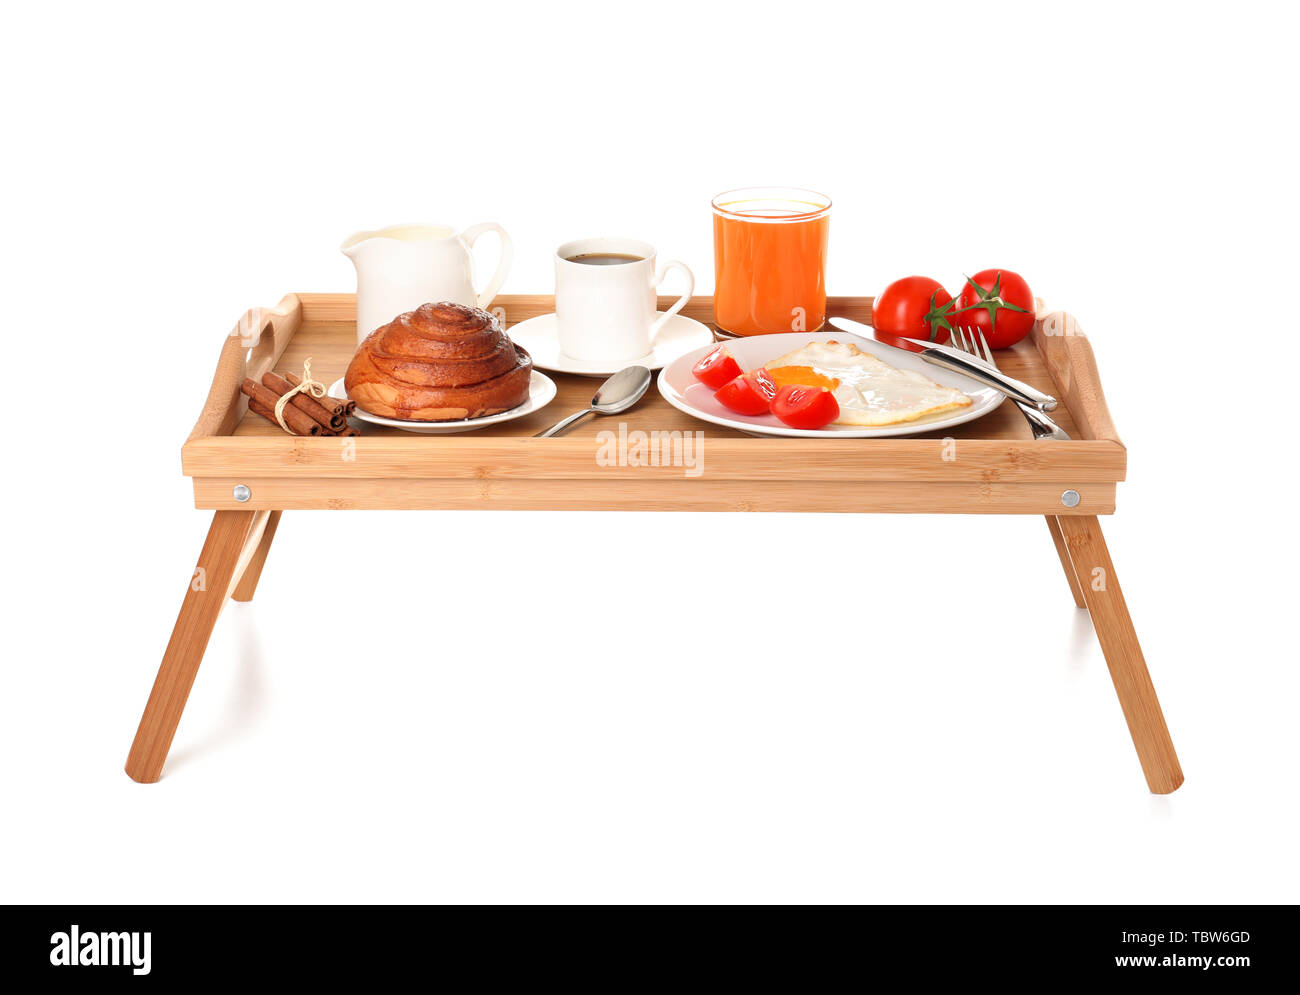 Bed Tray Table With Healthy Breakfast On White Background Stock Photo Alamy